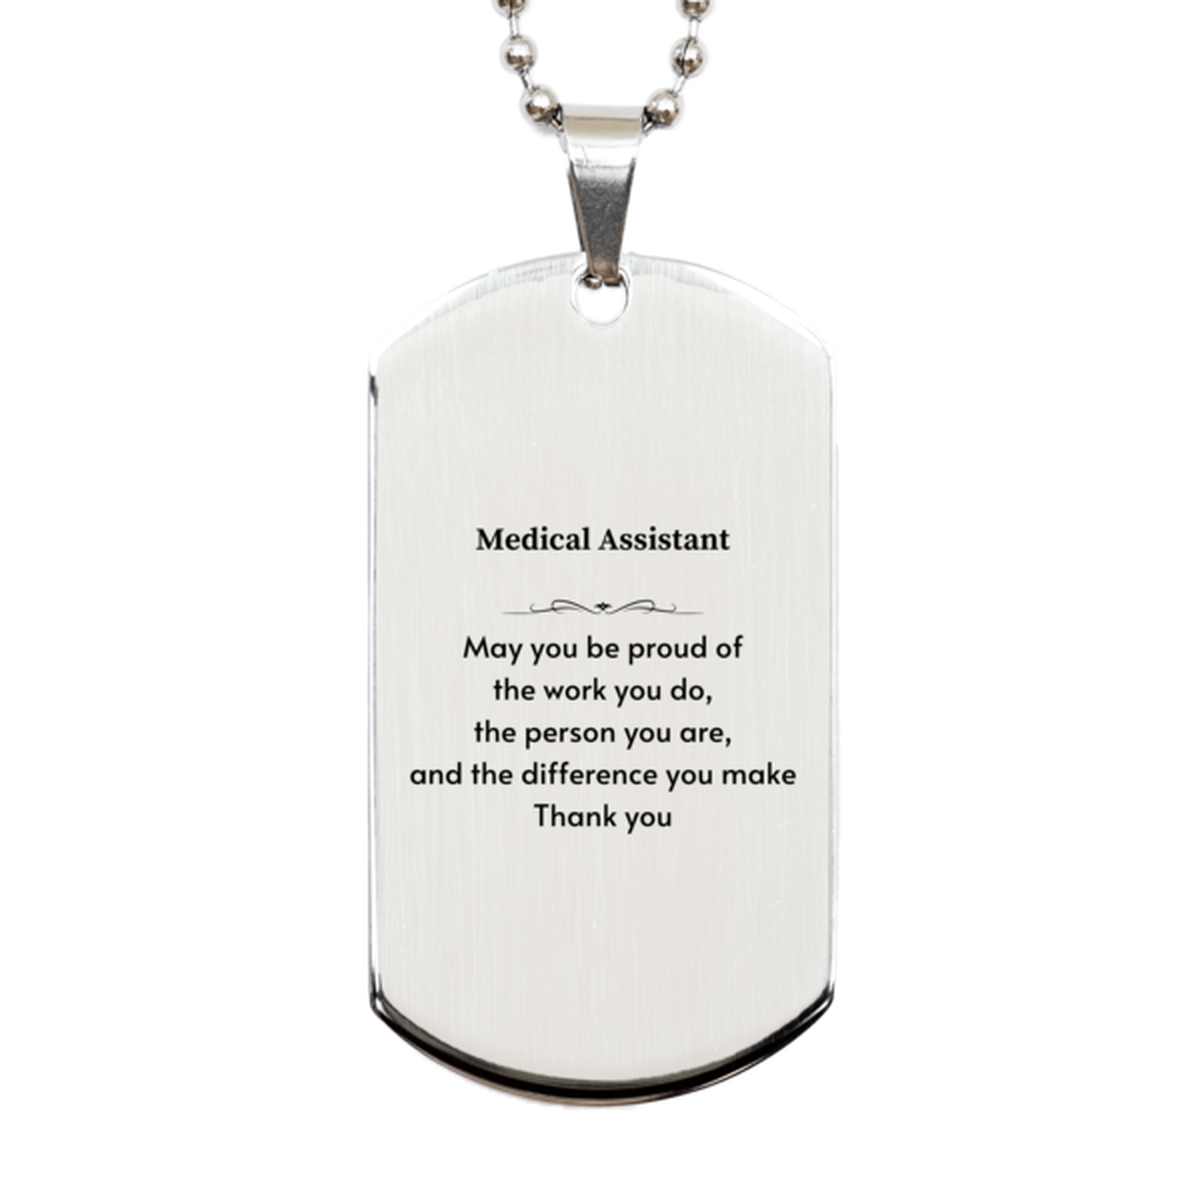 Heartwarming Silver Dog Tag Retirement Coworkers Gifts for Medical Assistant, Medical Assistant May You be proud of the work you do, the person you are Gifts for Boss Men Women Friends